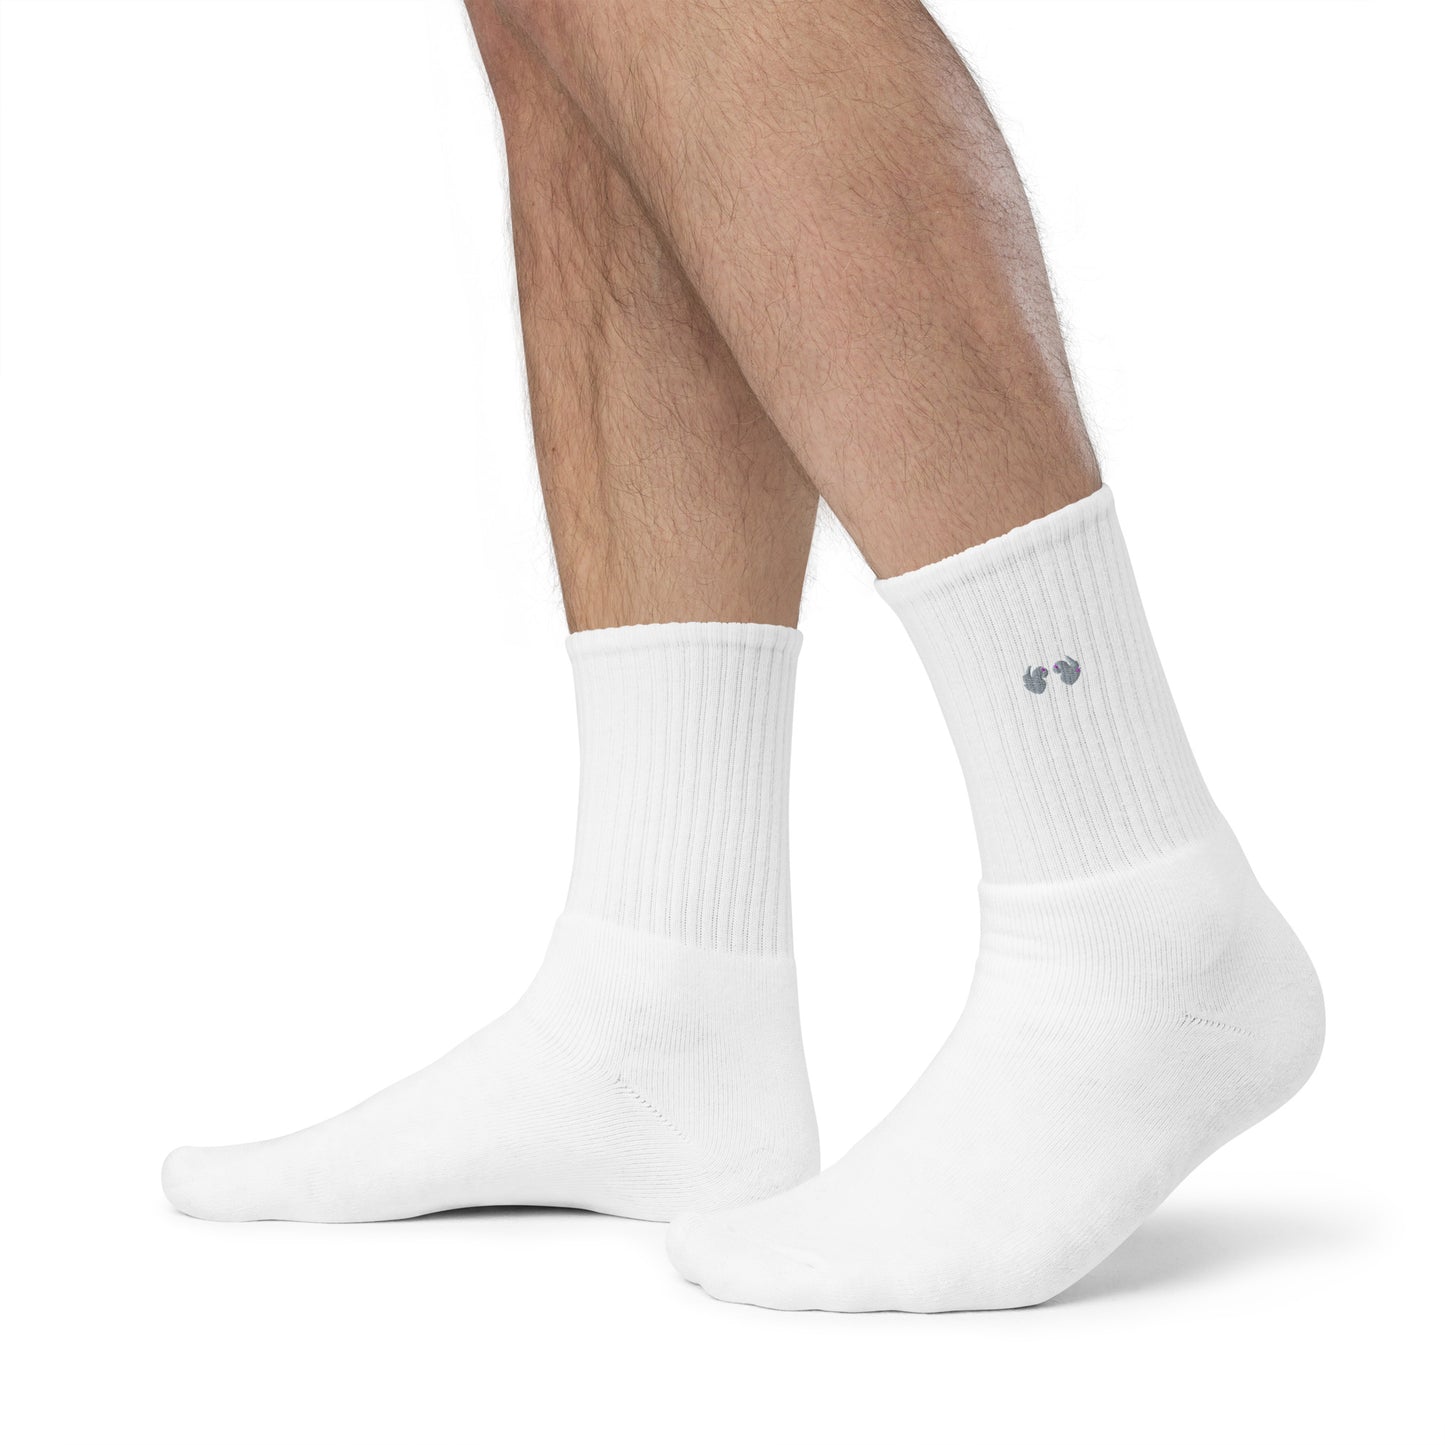 Level Up Your Comfort: Premium Embroidered Socks with Cloud-Like Cushioning (Made in USA)